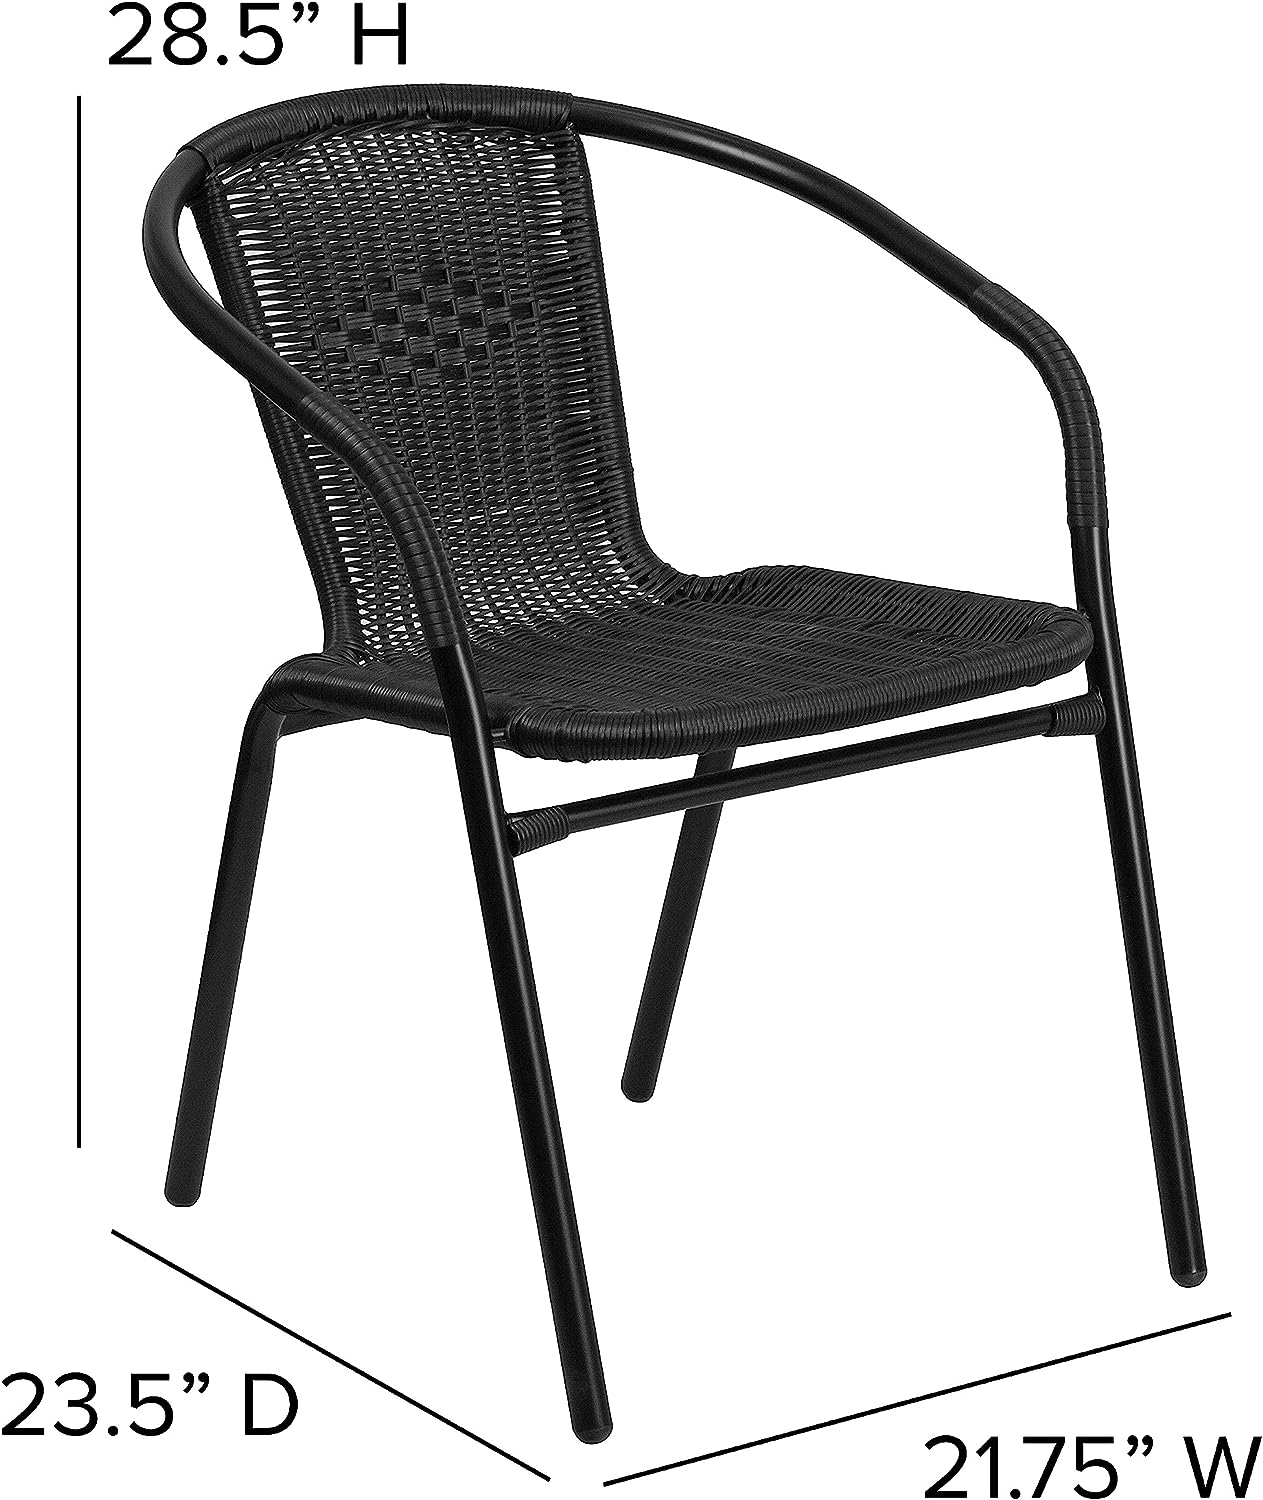 NEW - Flash Furniture Lila 4 Pack Black Rattan Indoor-Outdoor Restaurant Stack Chair | Versatile and Stylish Seating - Retail $169